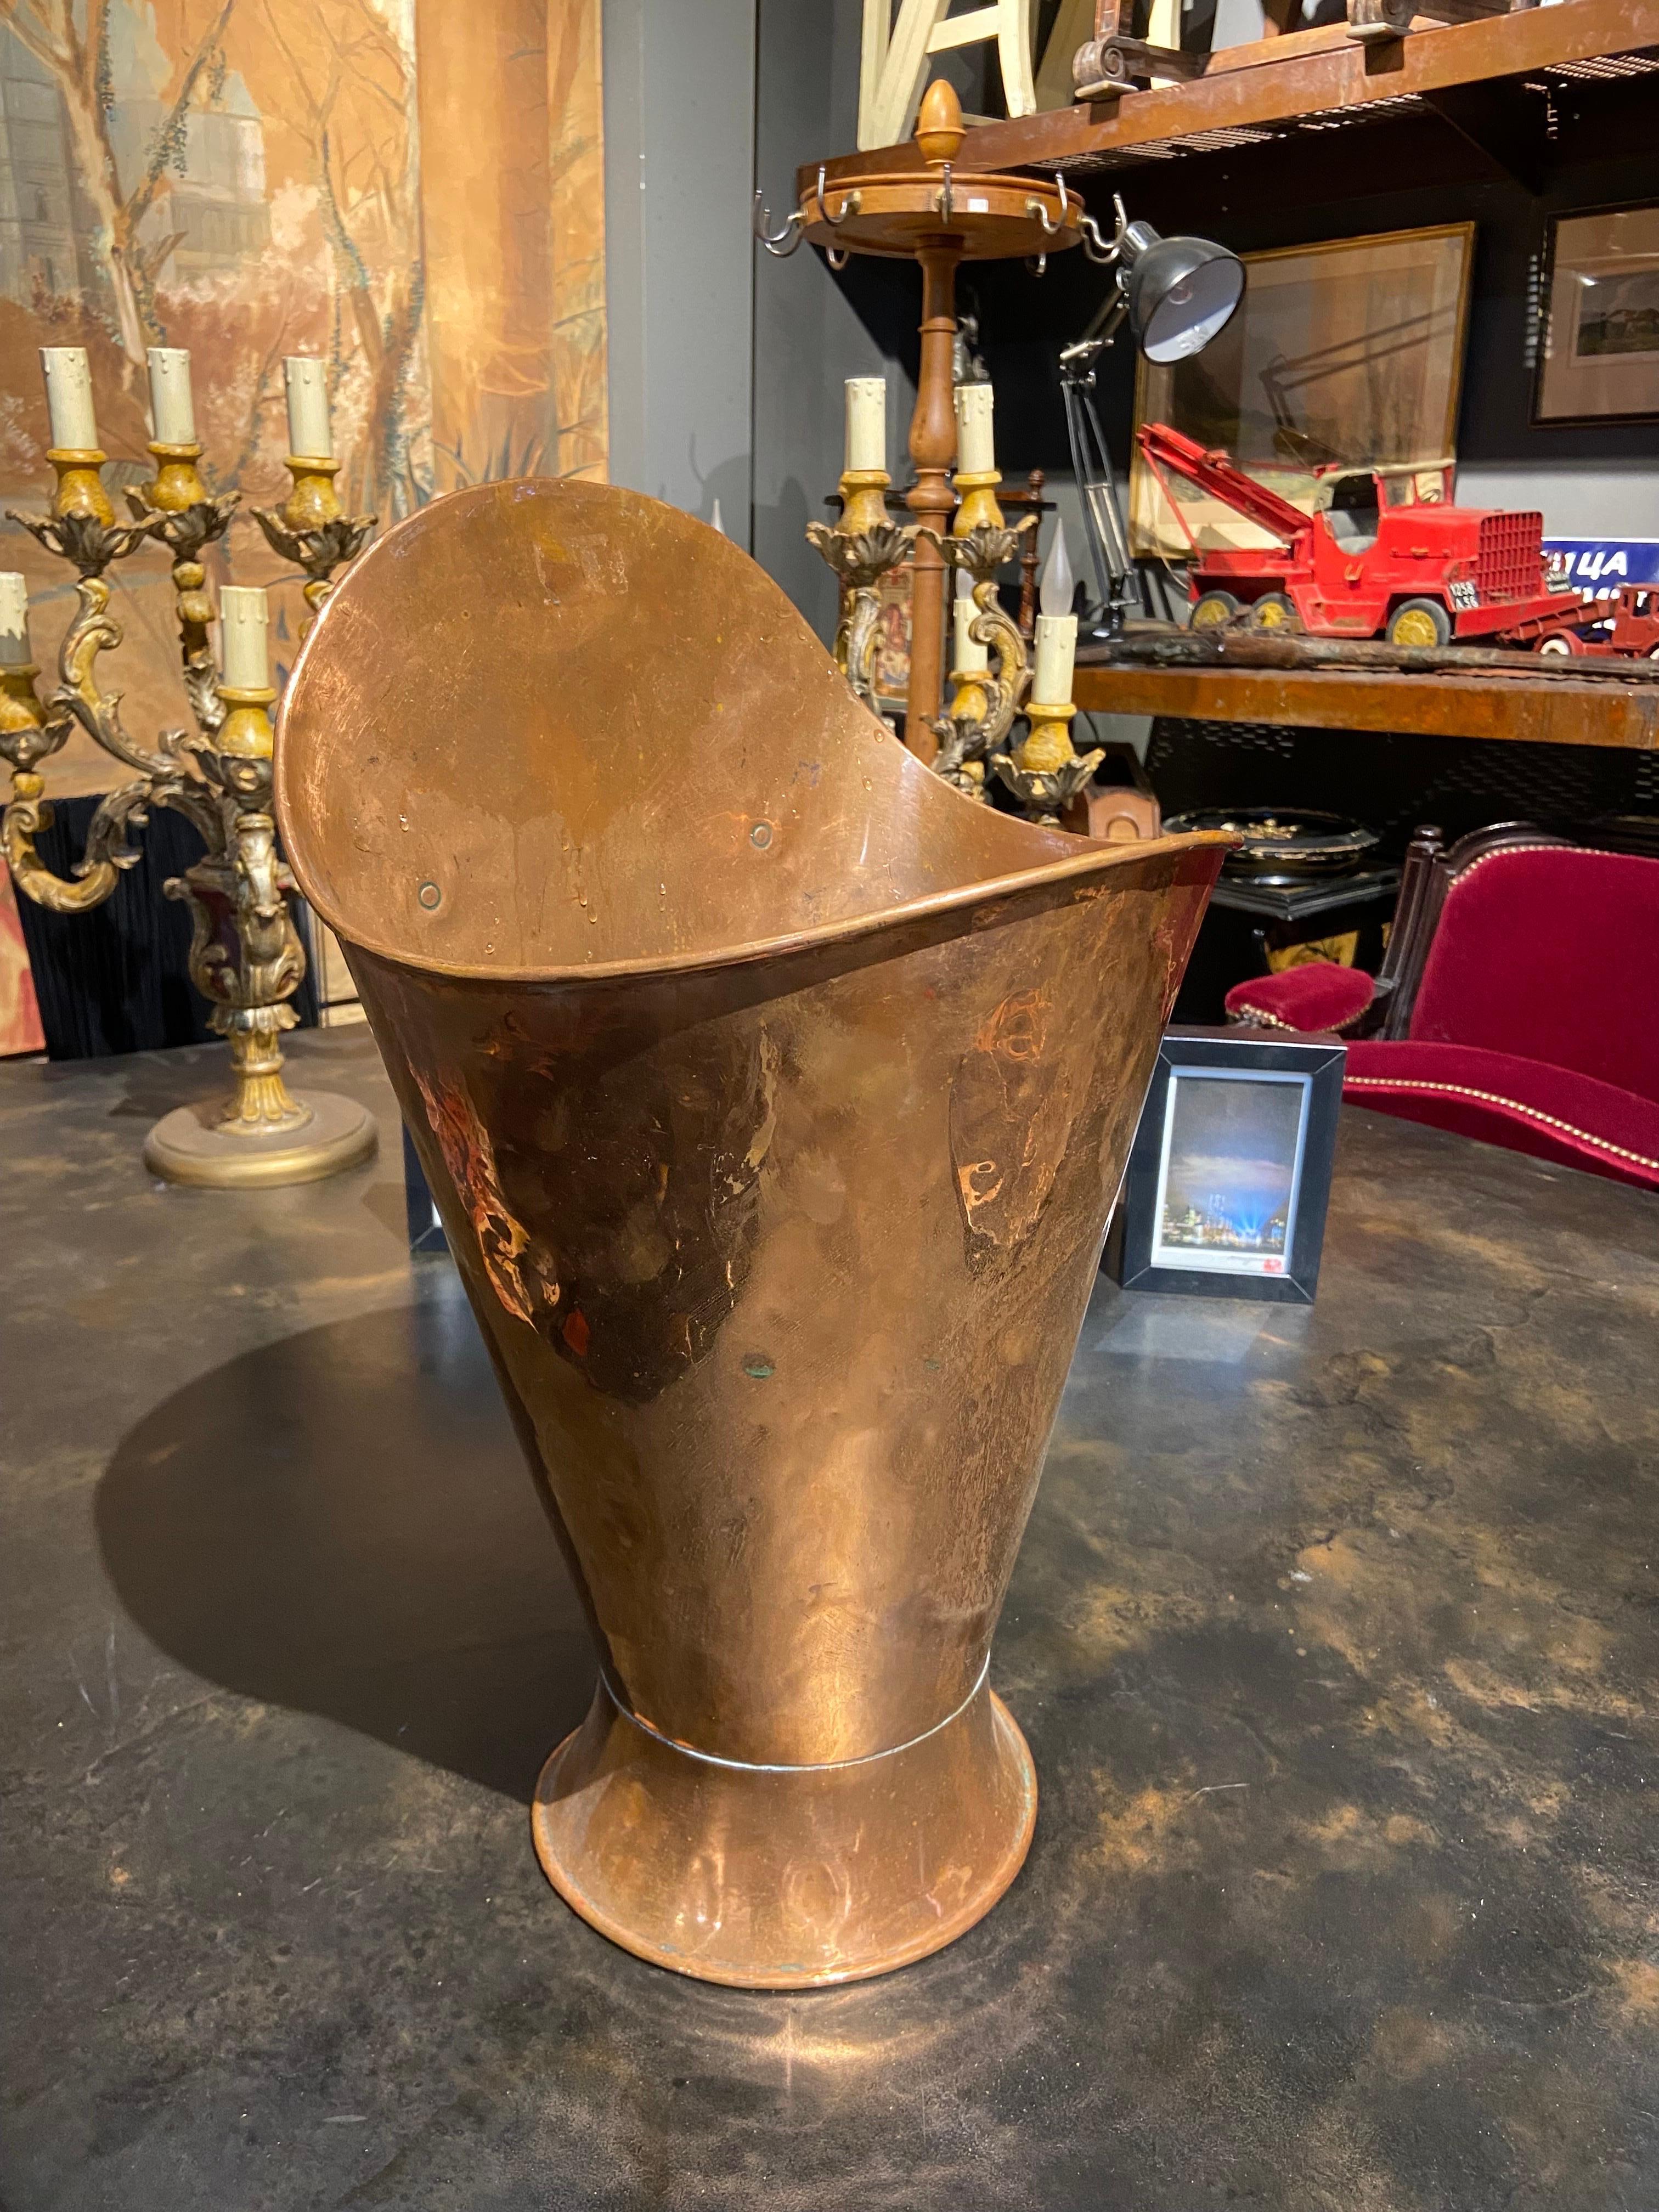 20th Century French oval umbrella stand which is hand made in copper. It has four hooks at the back and could be attached to a wall. Very good original condition with no restorations made.
France, circa 1920
